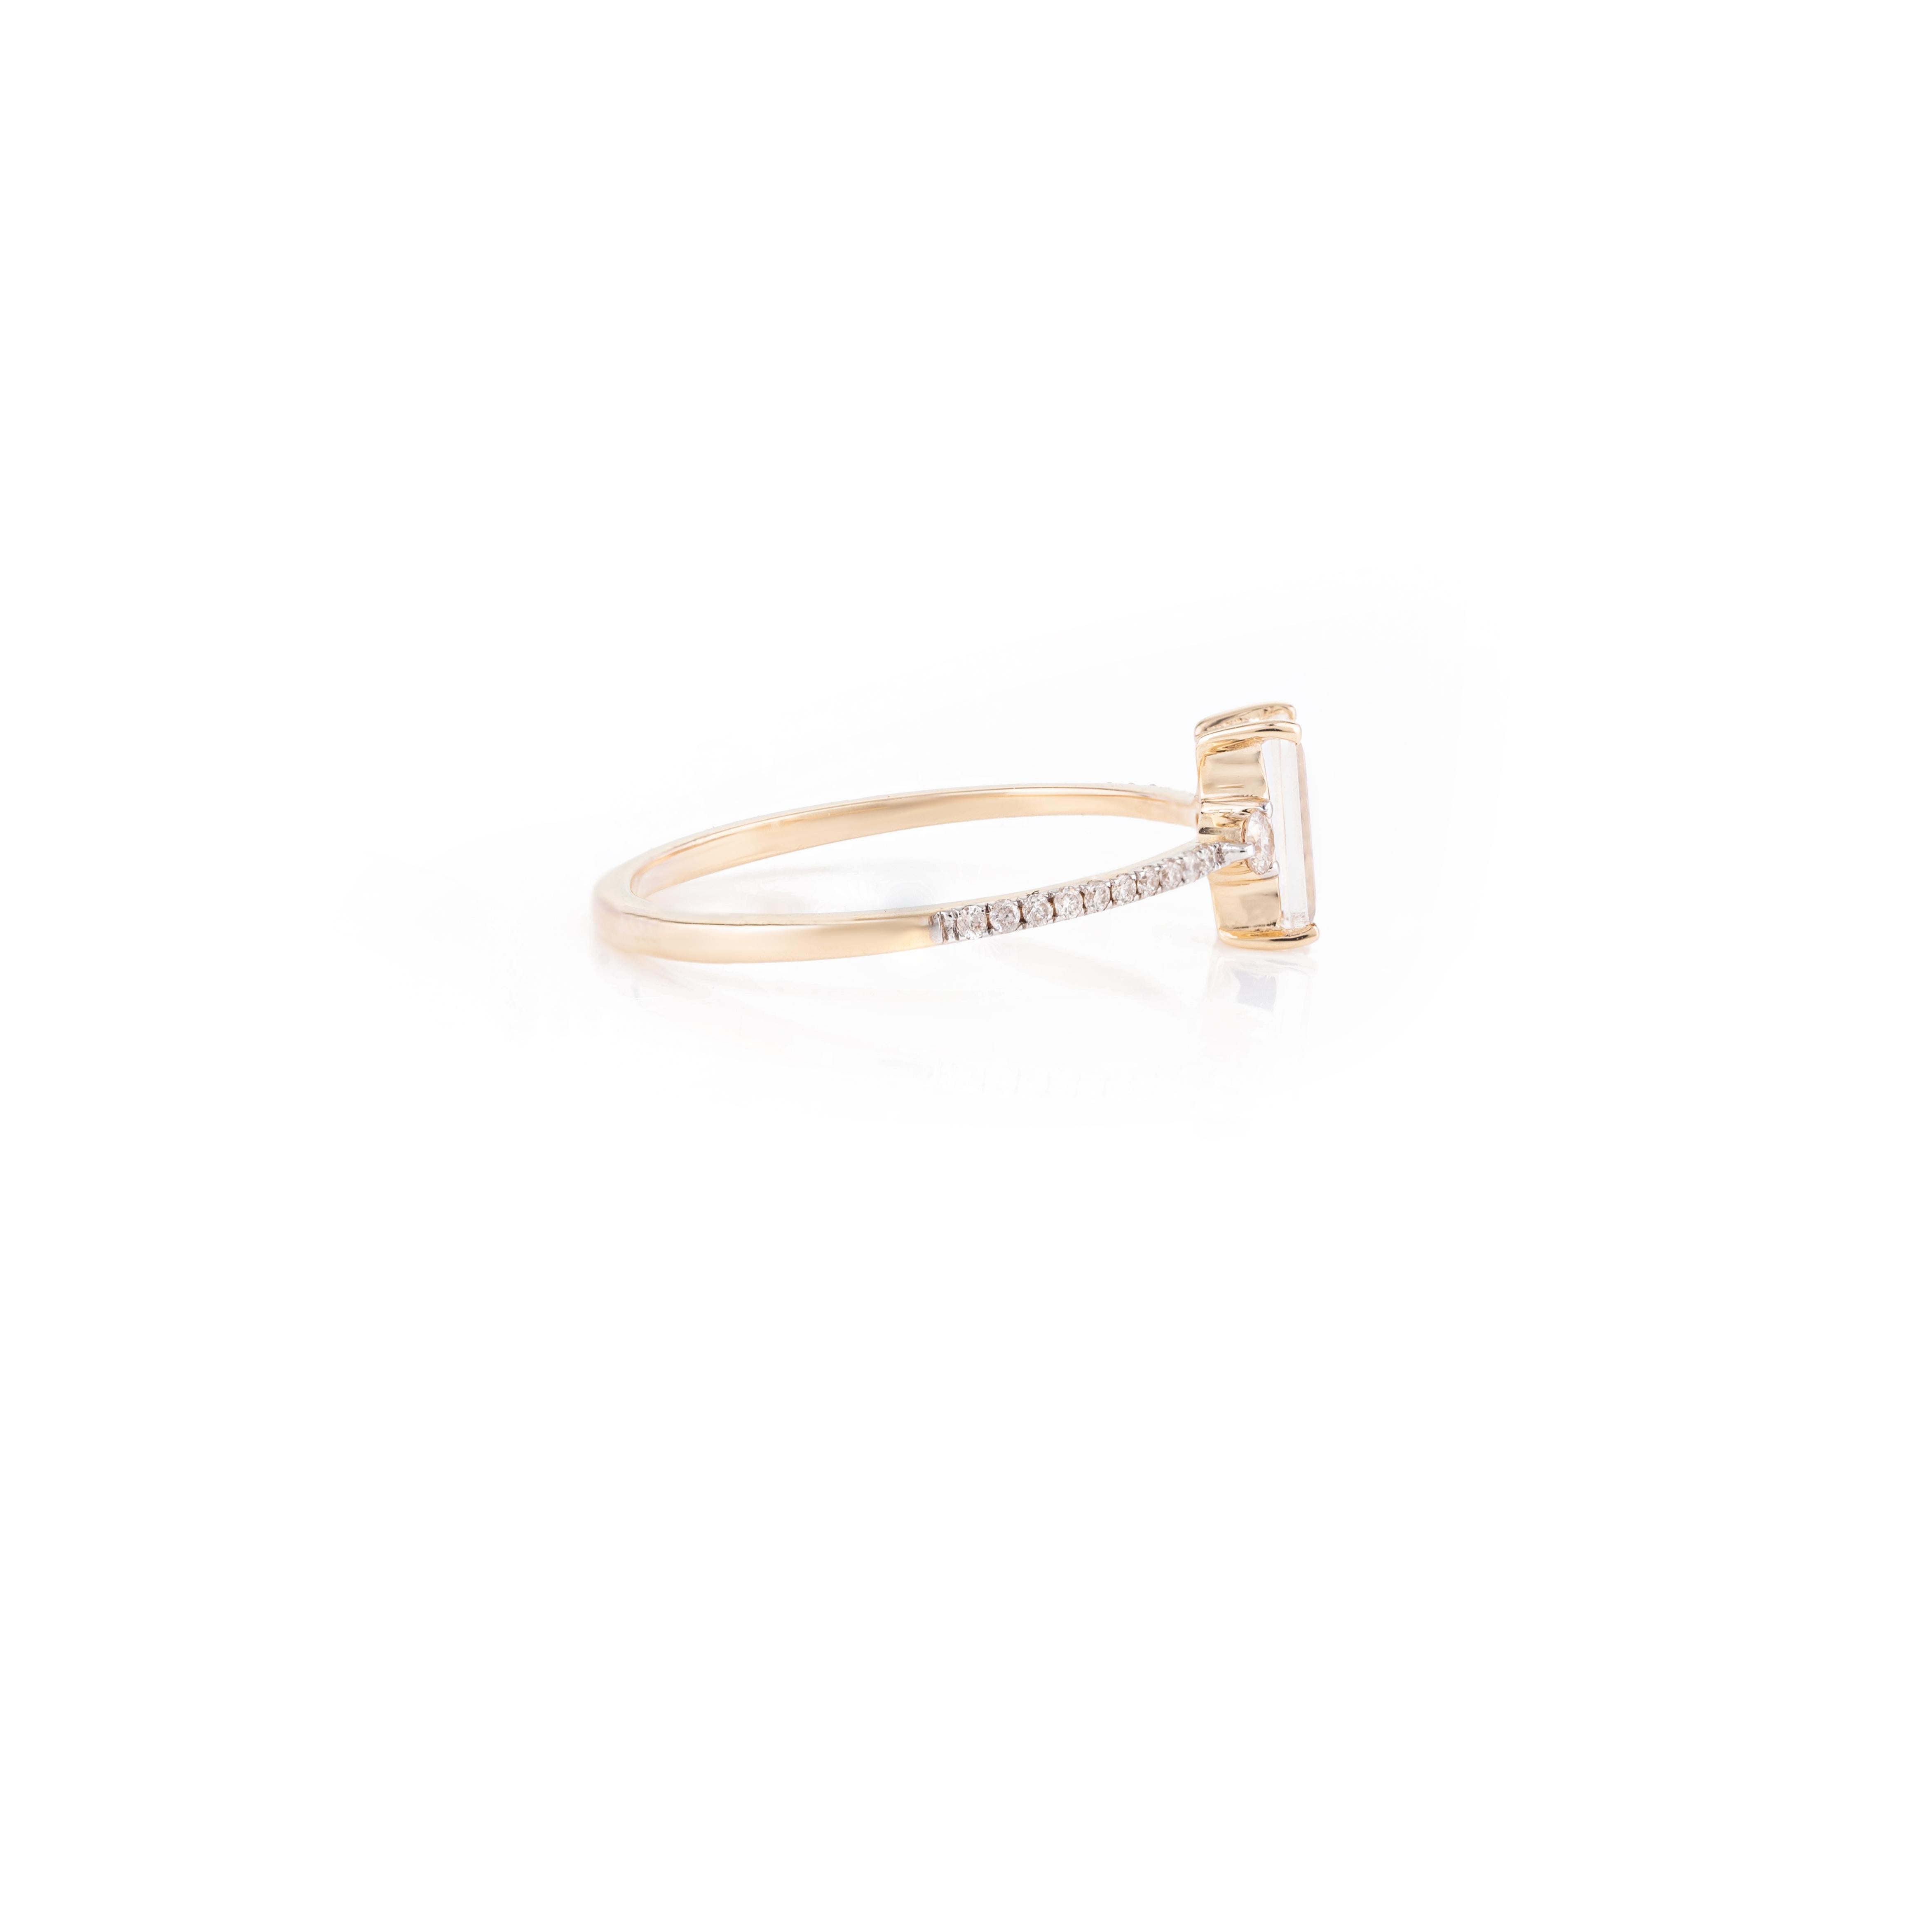 For Sale:  Dainty Baguette Moonstone Diamond Everyday Ring in 14k Solid Yellow Gold 5